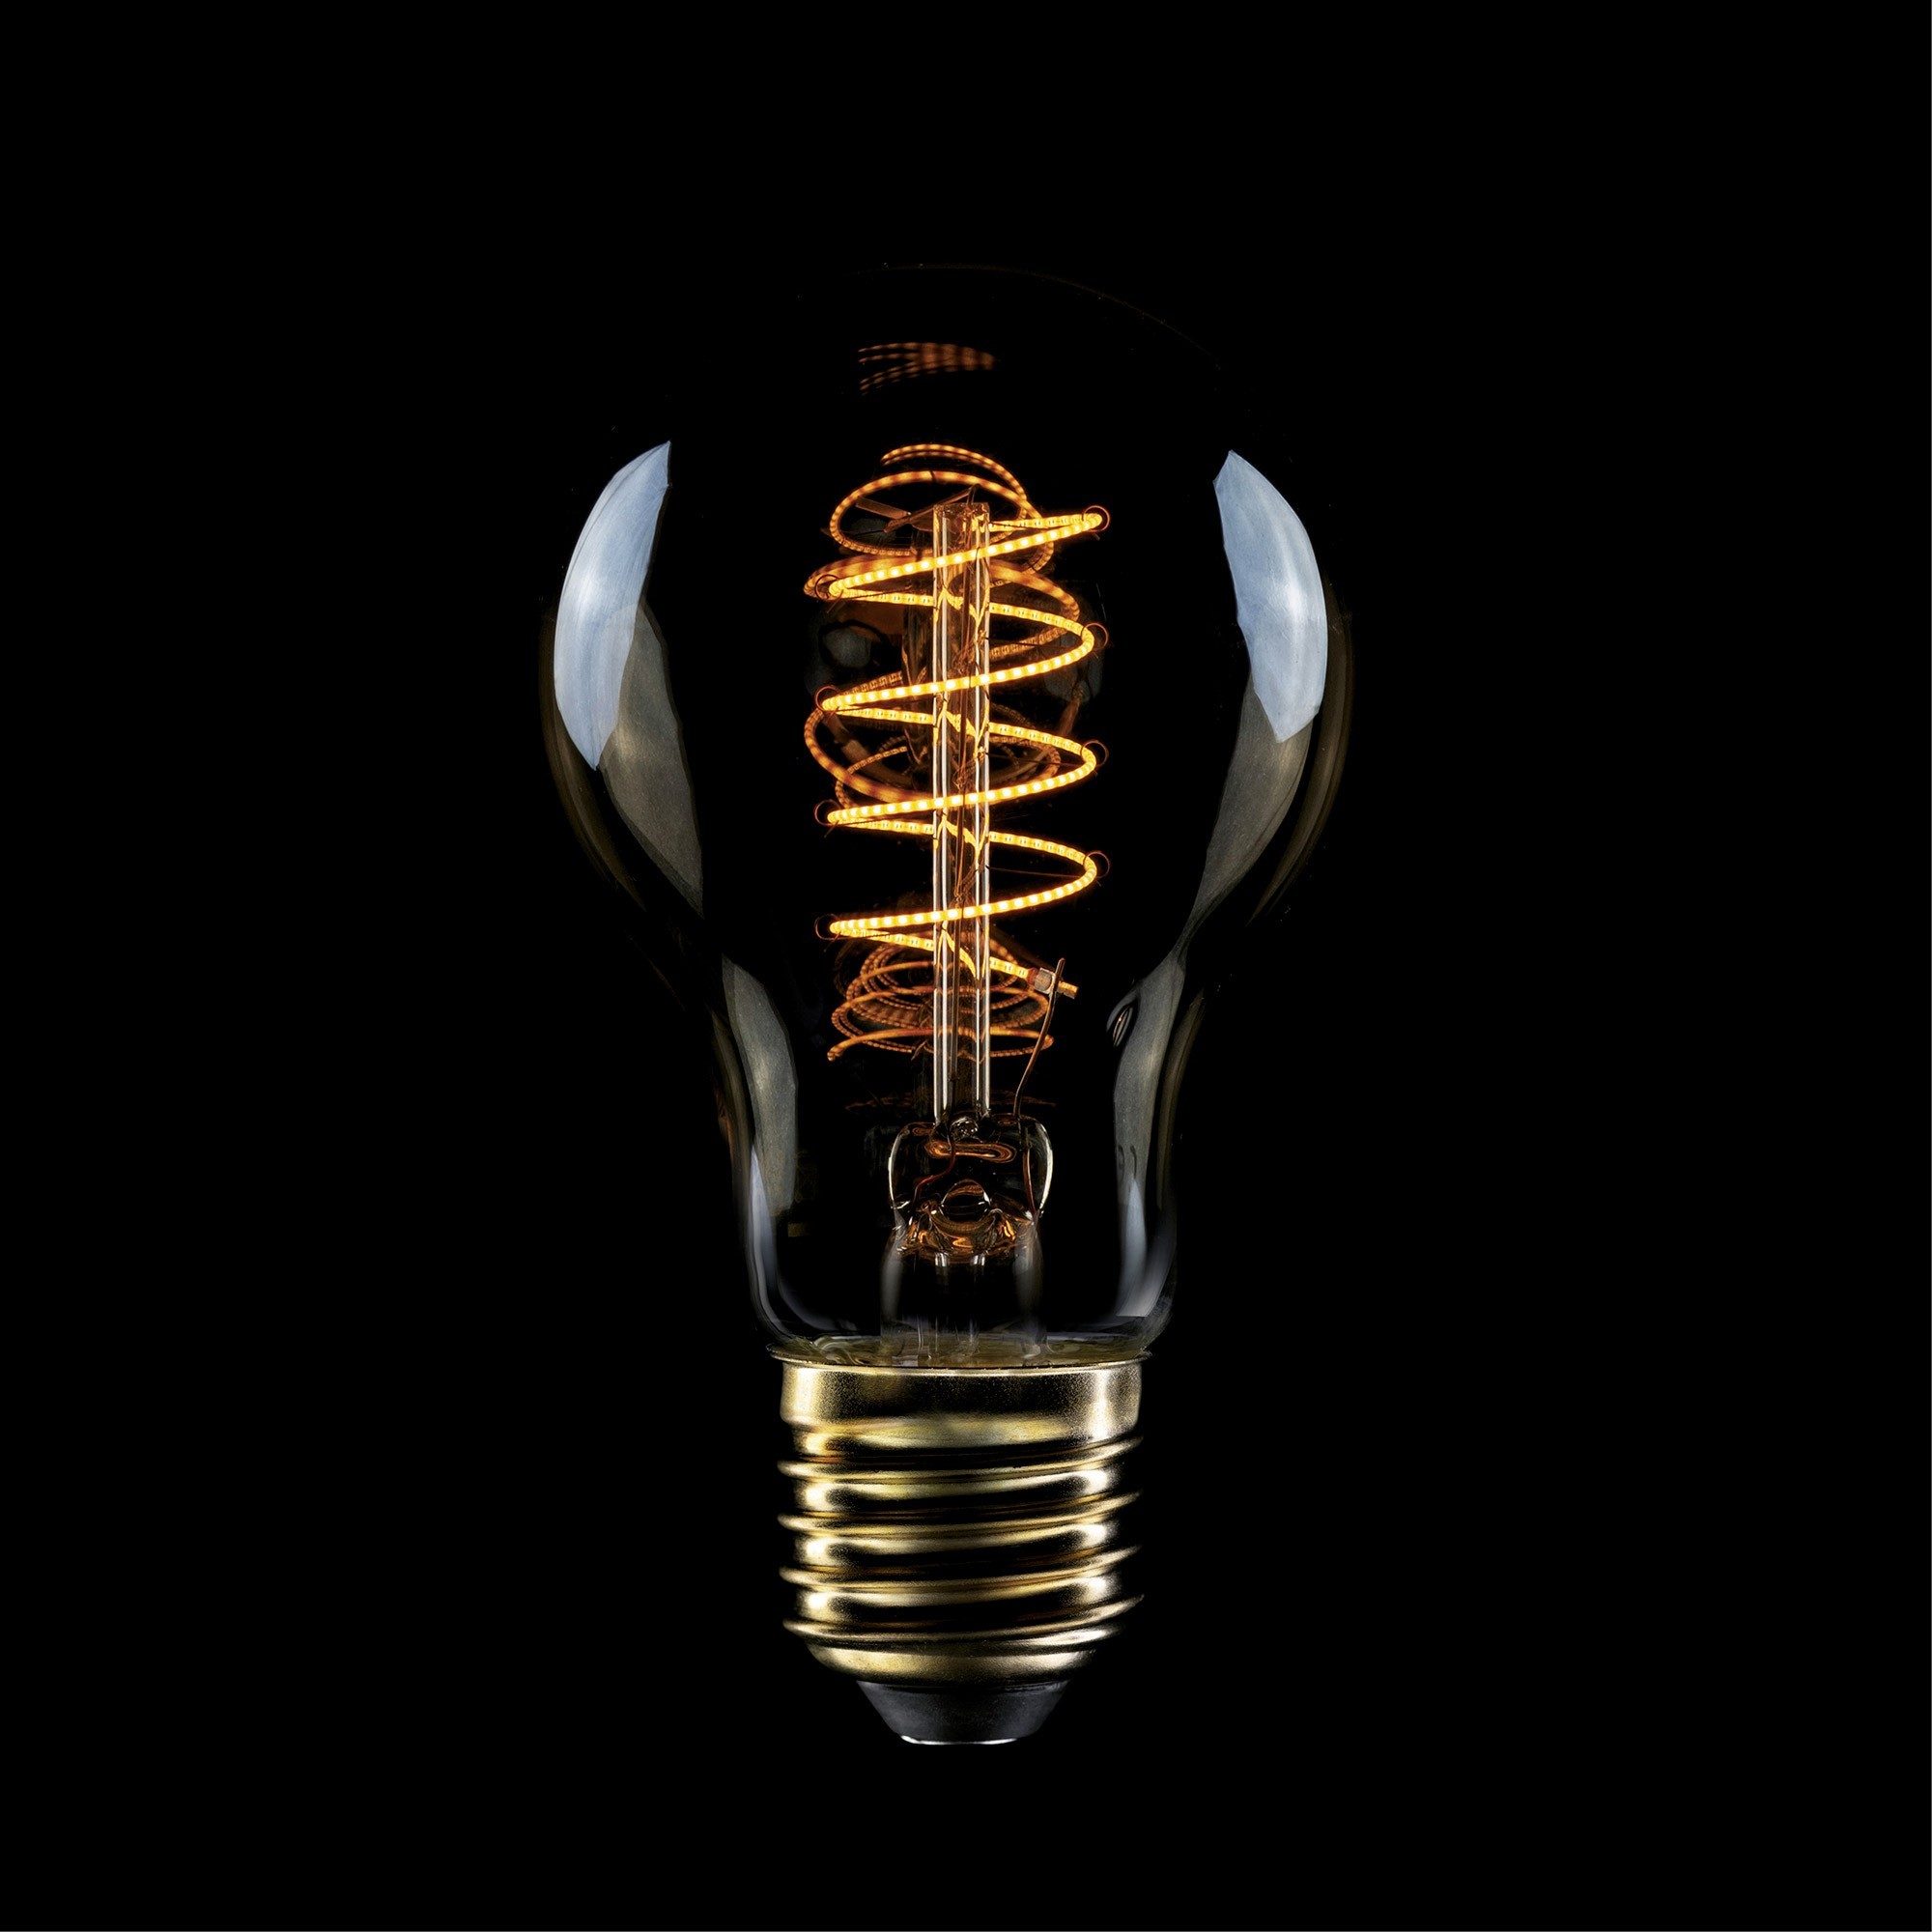 C03 - LED Light Bulb A60, E27, 4W, 1800K, 250Lm, with extra slim spiral filament, golden glass